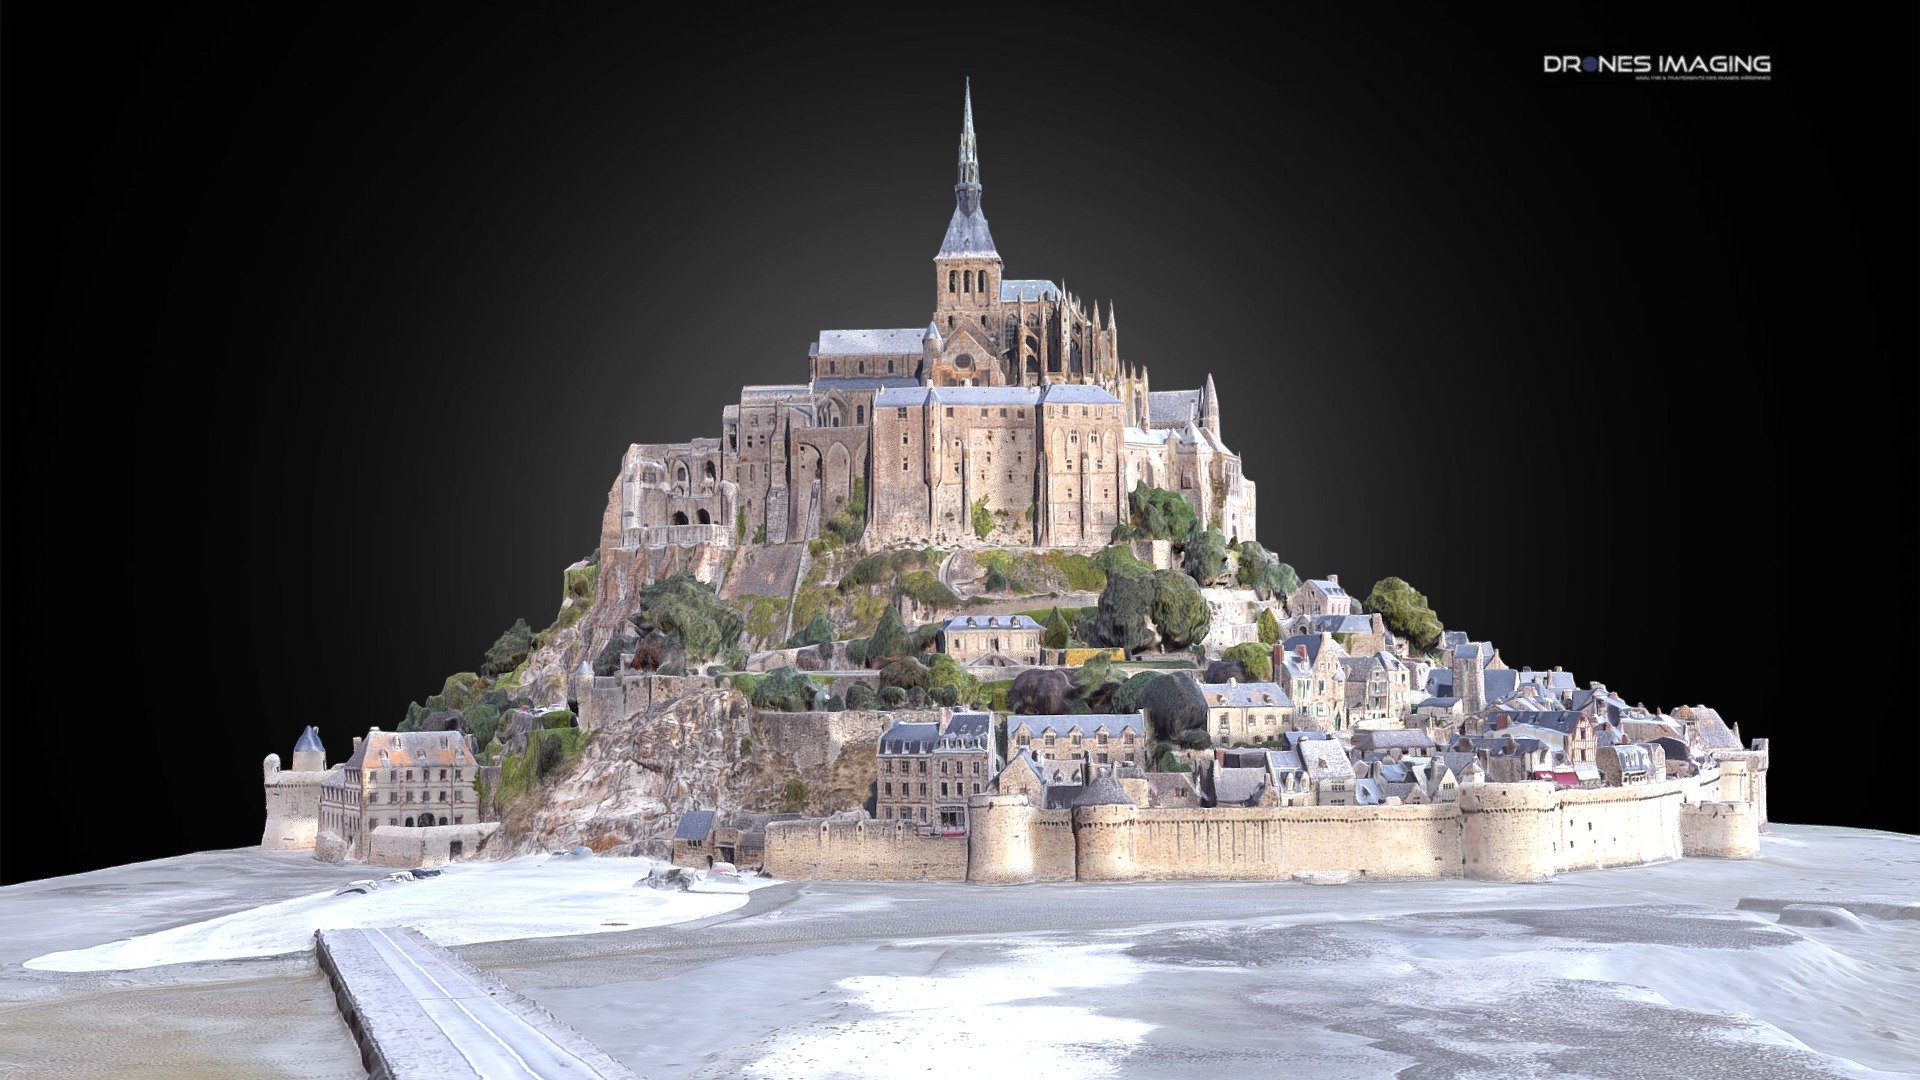 Mont Saint-Michel and its bay